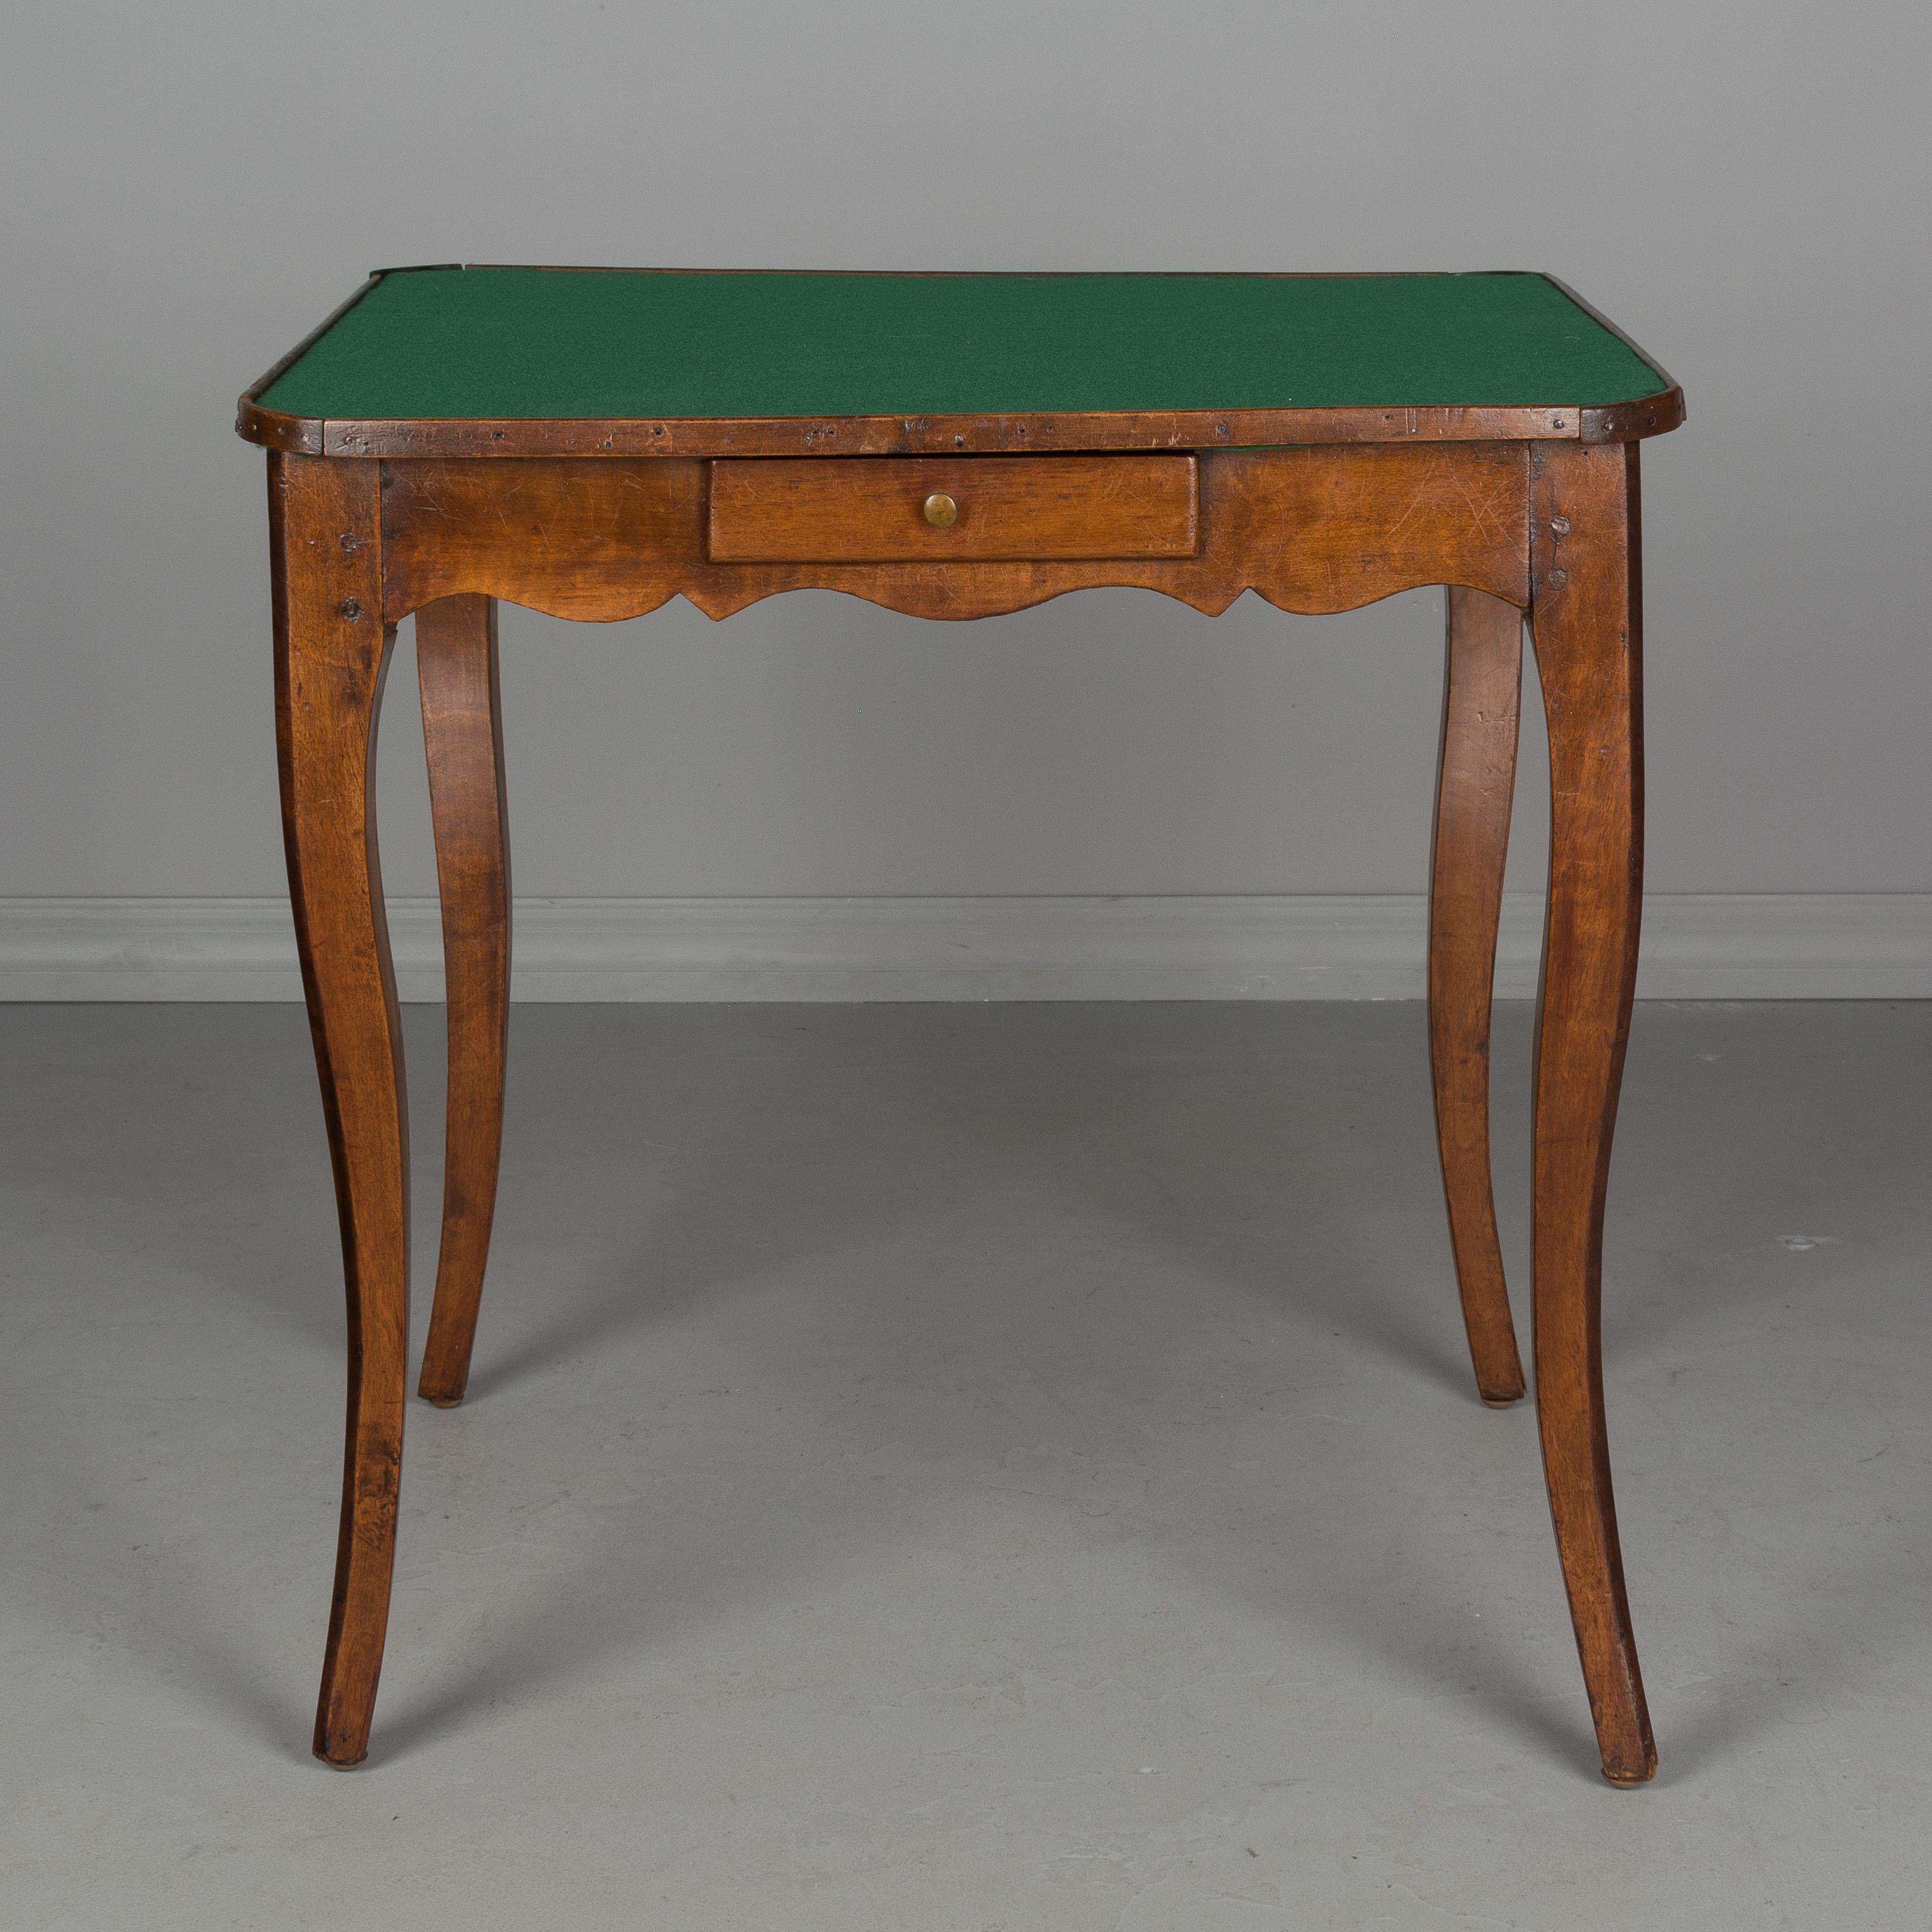 An early 19th century French Louis XV style game table made of walnut with pegged construction, curved legs and four drawers with brass knobs. New felt top. Some replaced corner trim. Please refer to photos for more details. We have a large